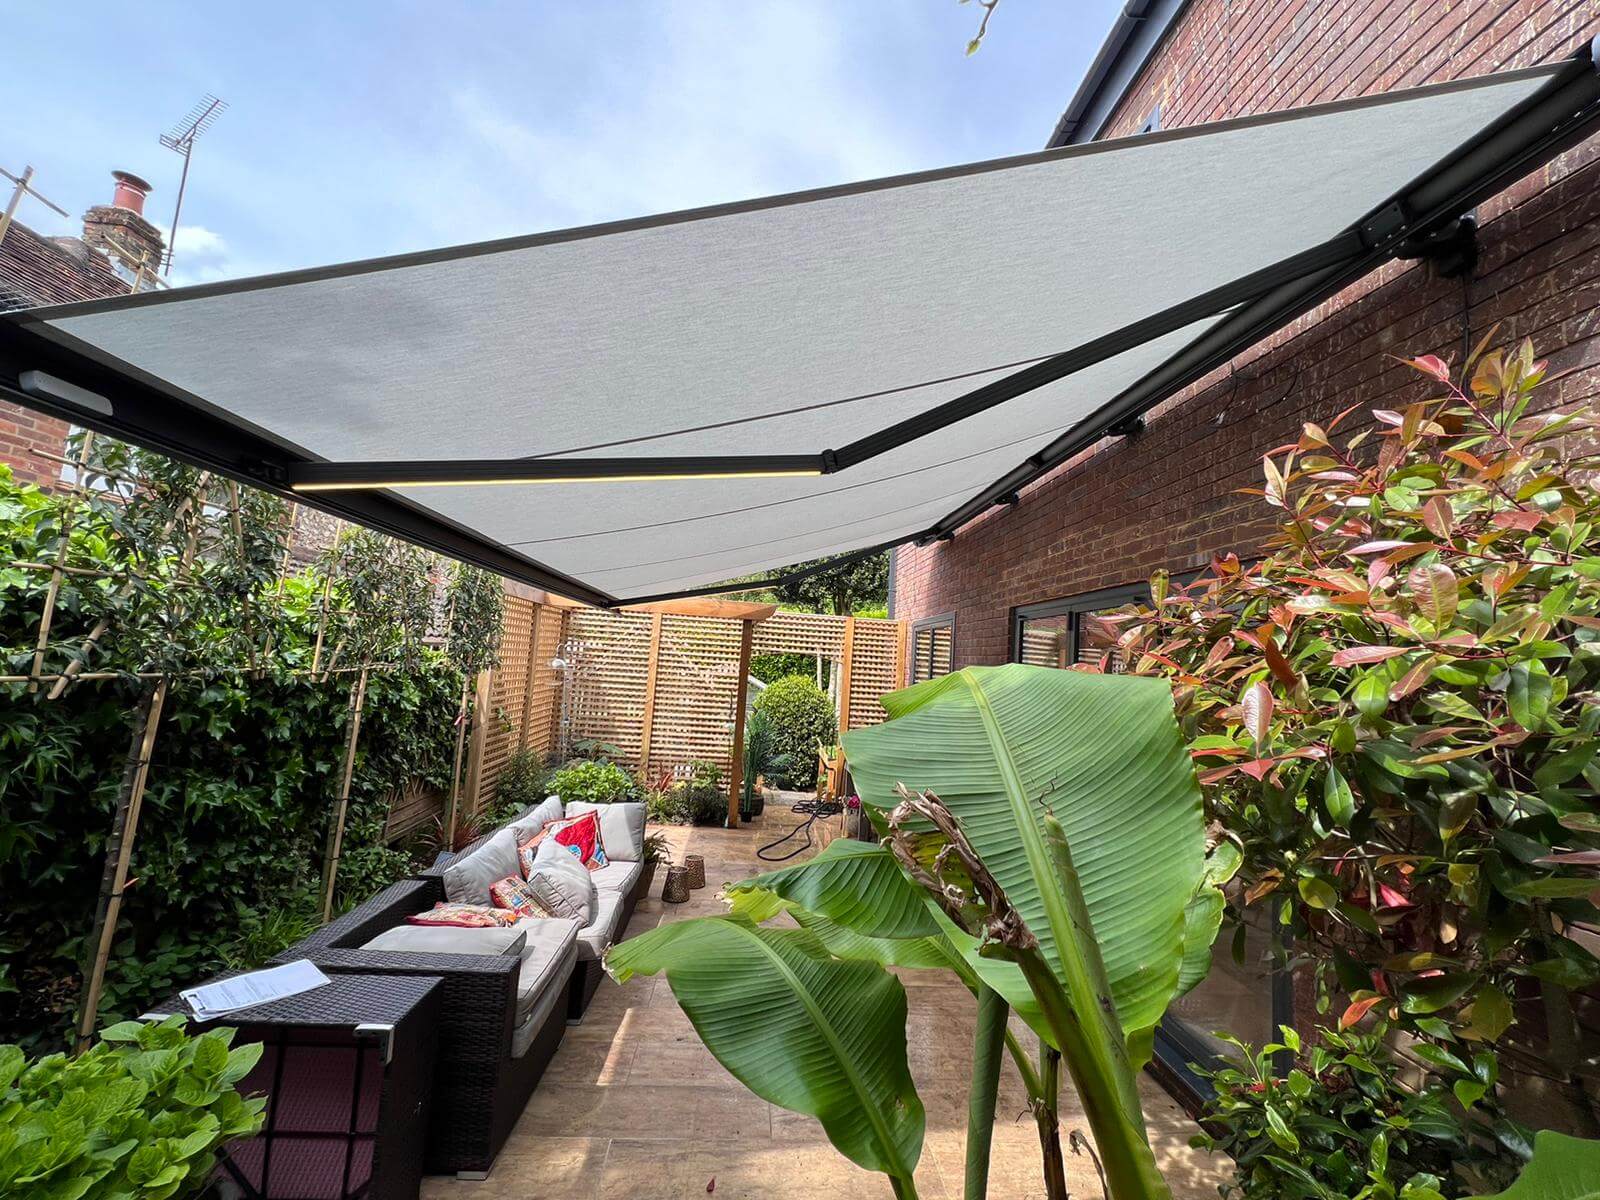 Awnings and canopies in garden behind the building